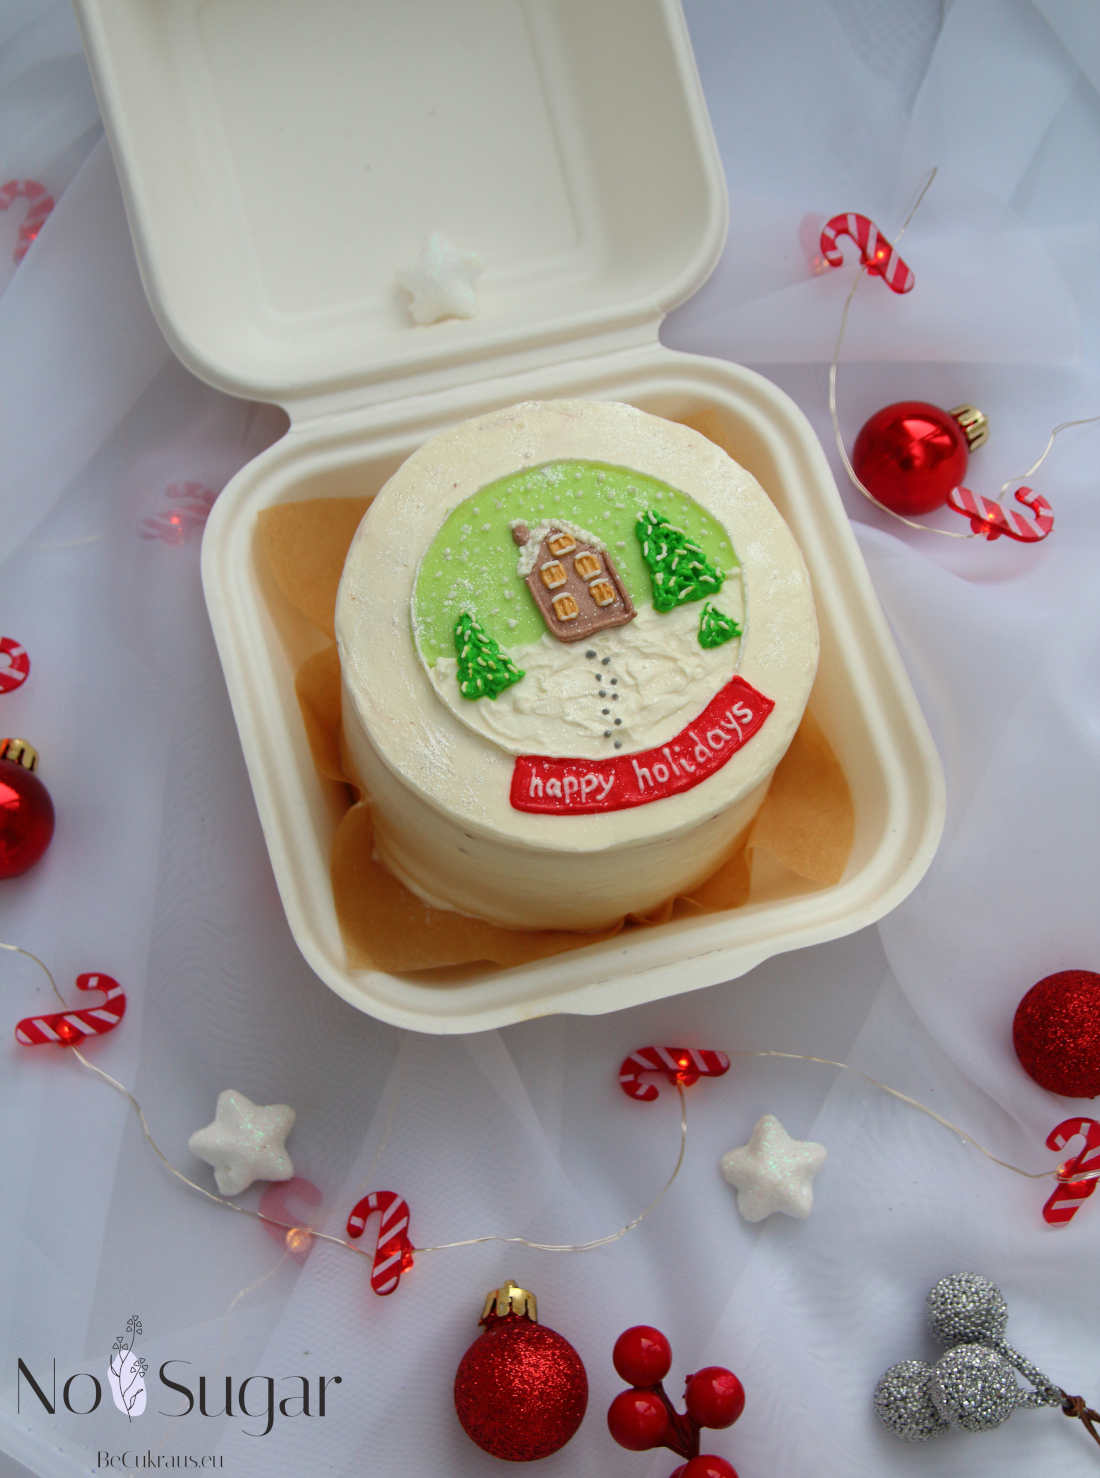 Happy Holidays bento cake as a gift for Christmas and New Year